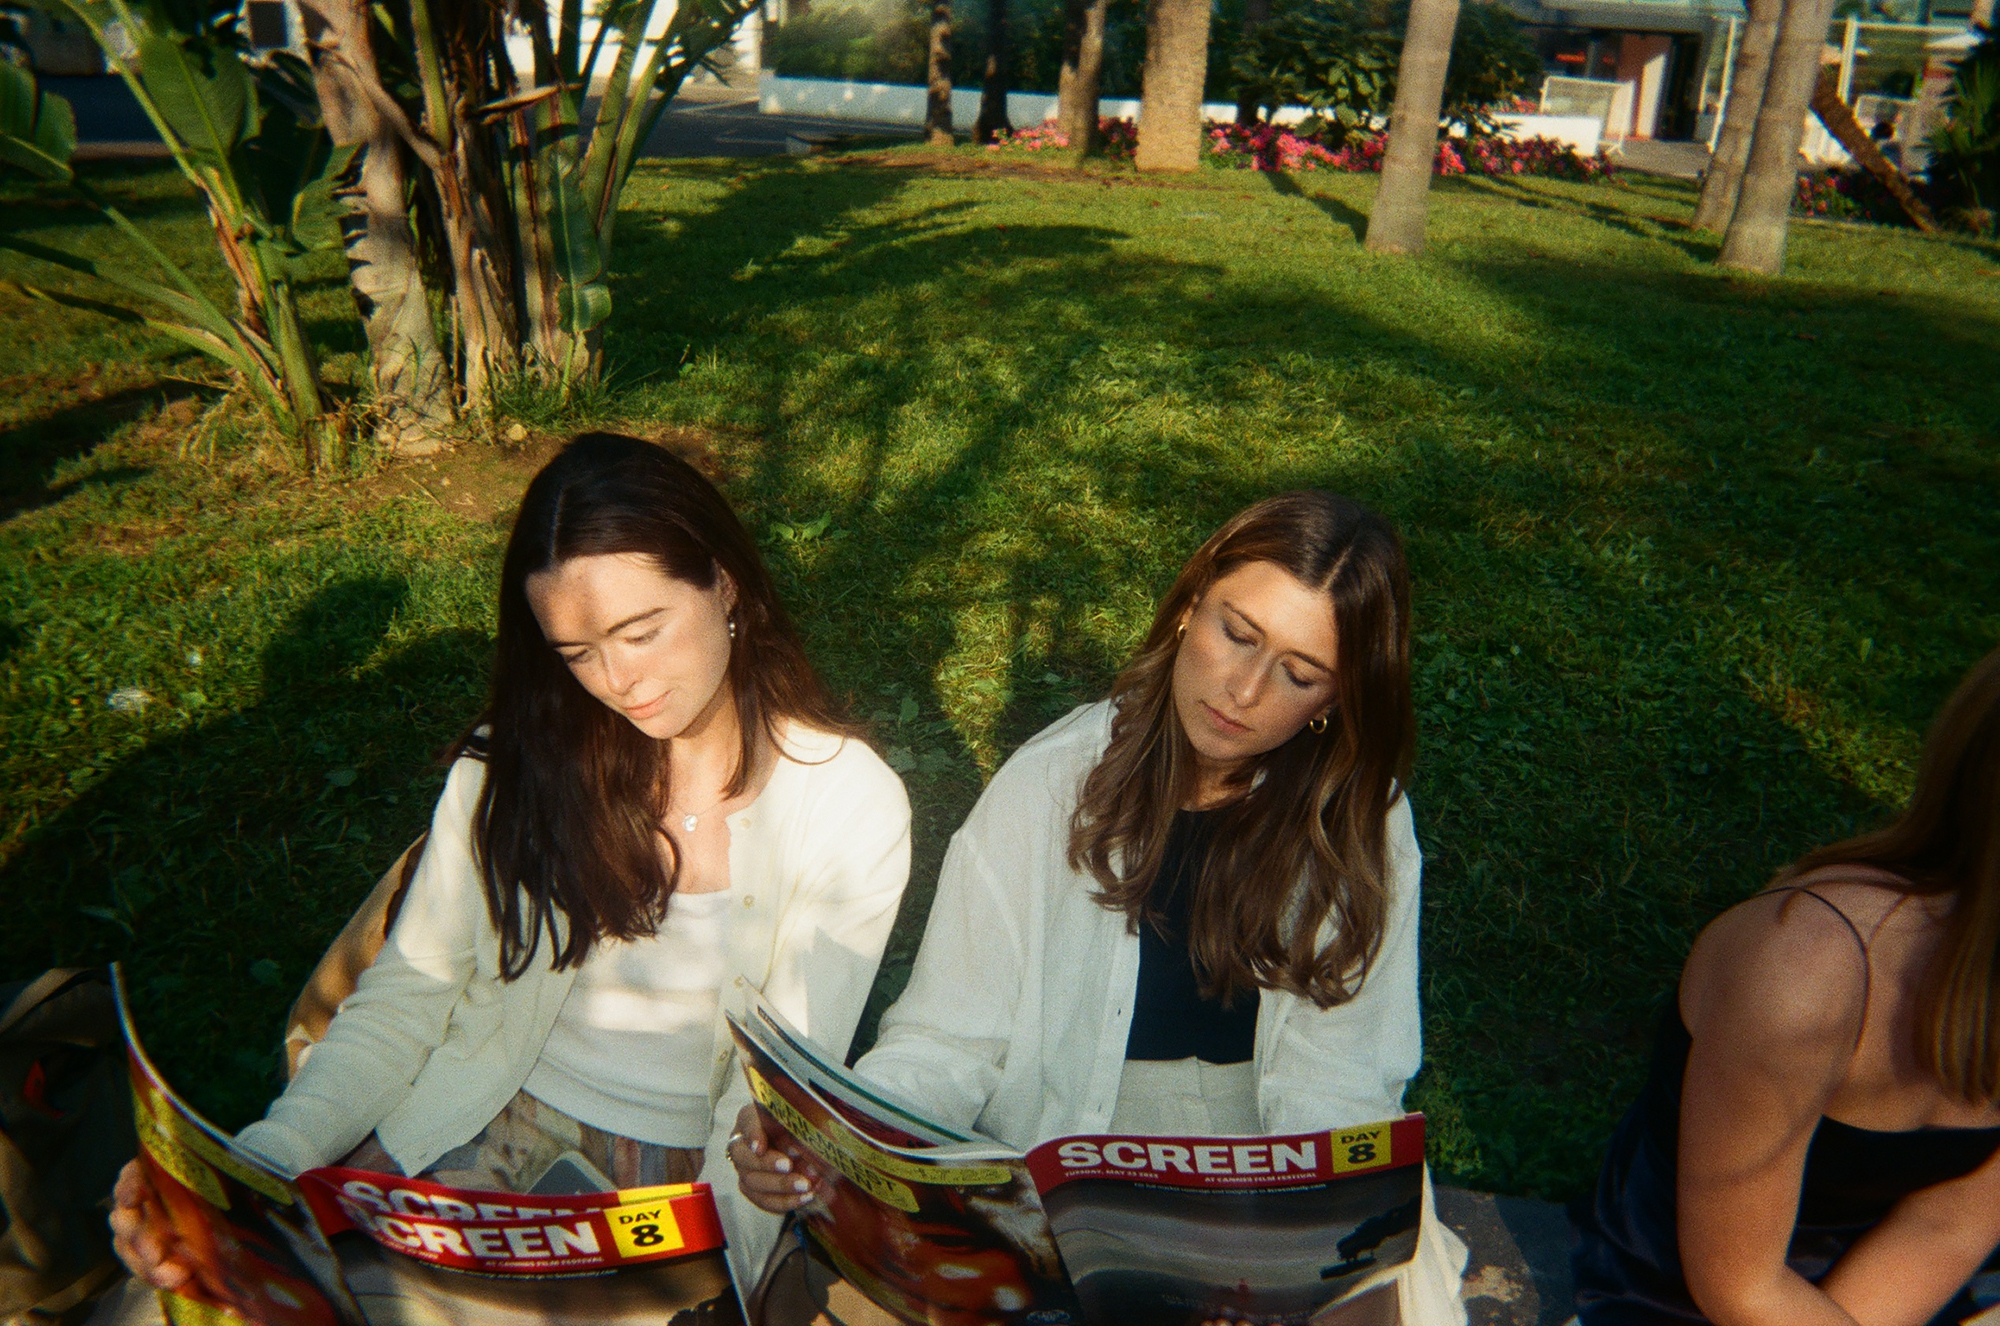 Isabel Sweeney and Drew Naiburg-Smith sitting on the grass together each reading a "Screen" Magazine